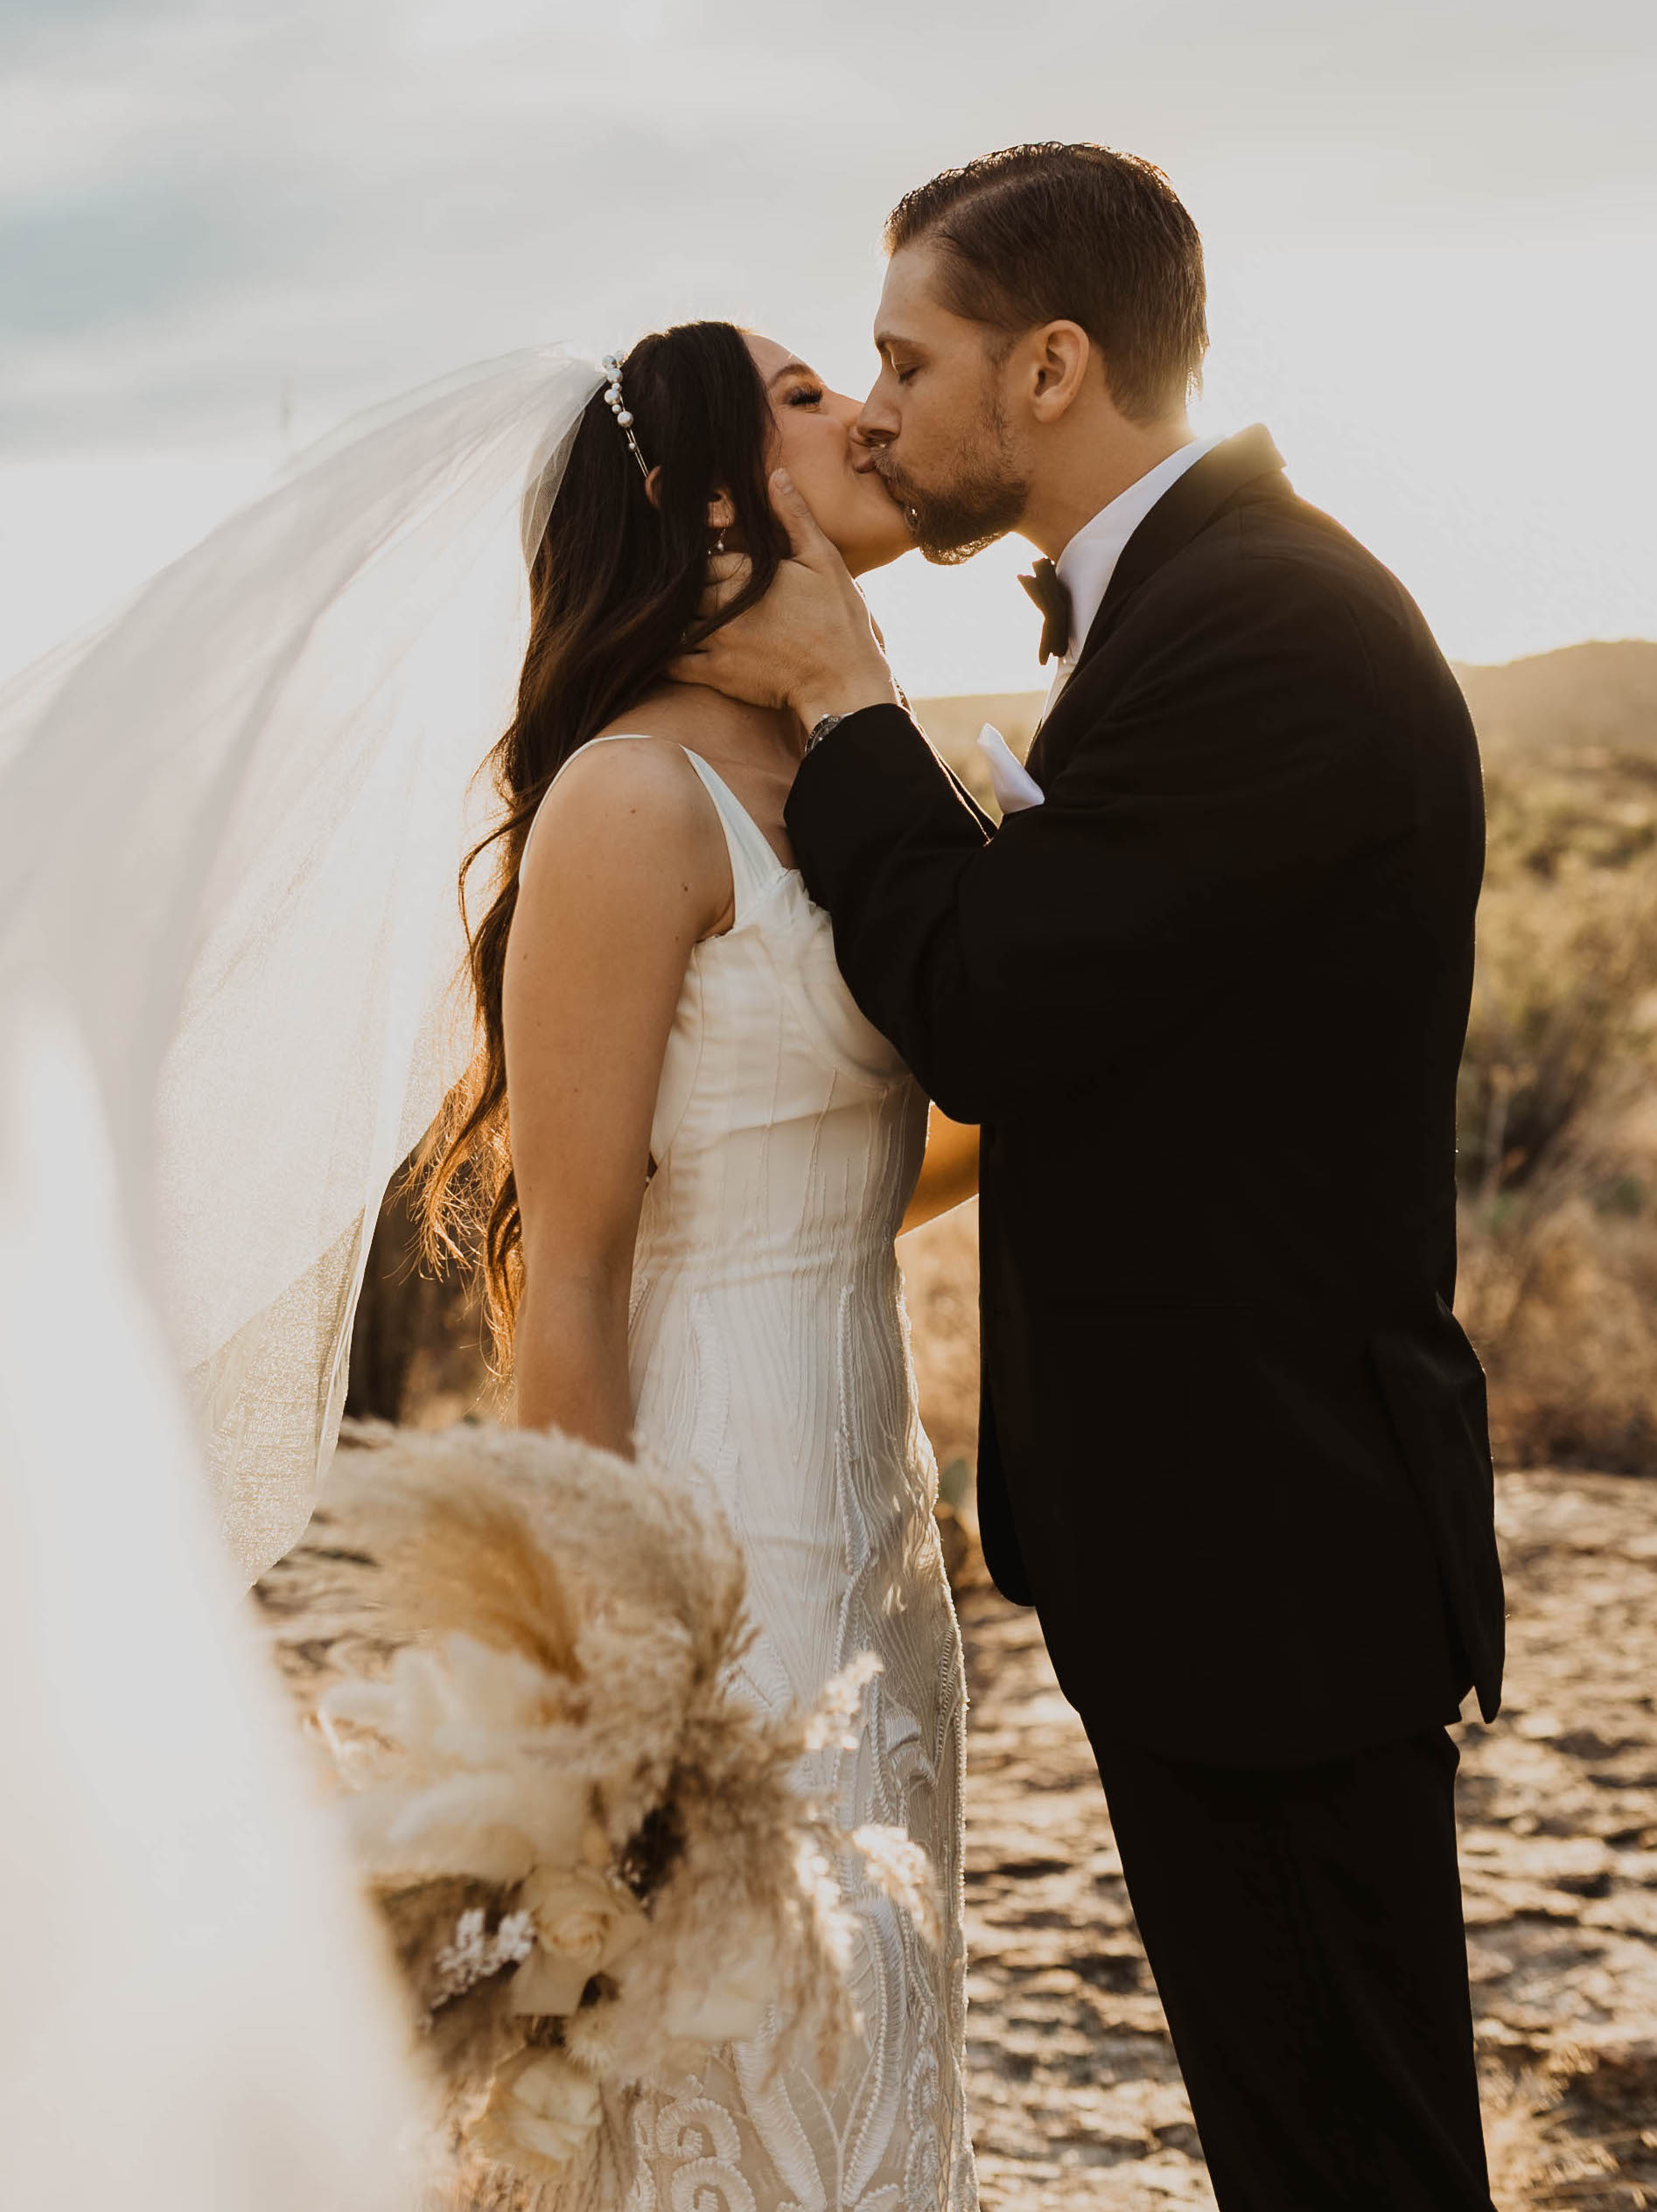 Riley from Caked Up With Riley kisses her groom at their elopement in Arizona.